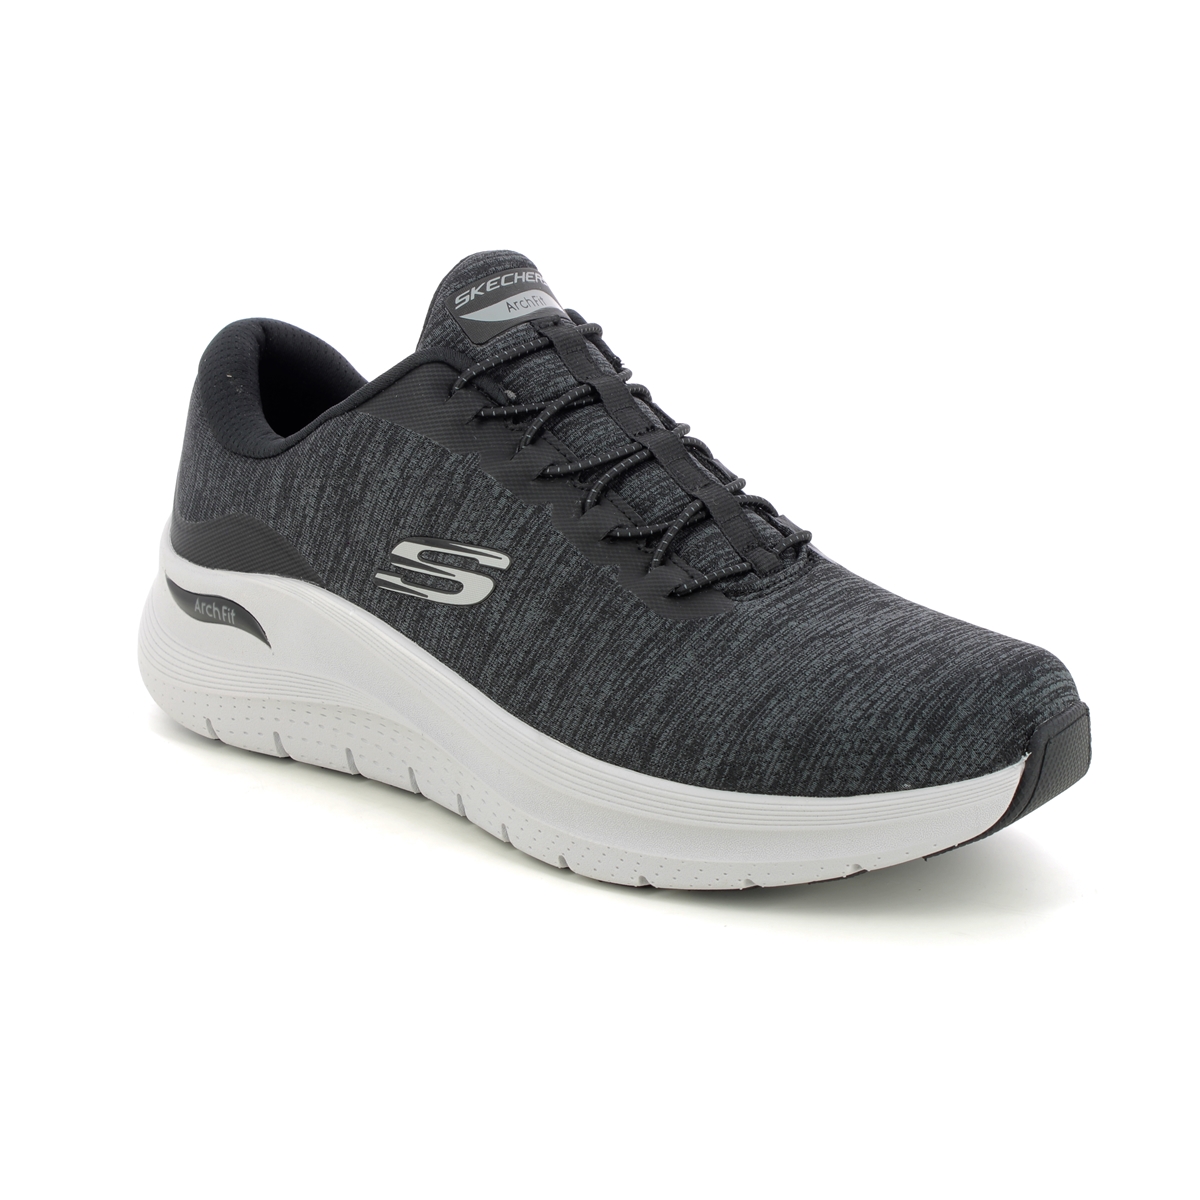 Skechers Arch Fit 2 Bungee BKGY Black grey Mens trainers 232709 in a Plain Textile in Size 7